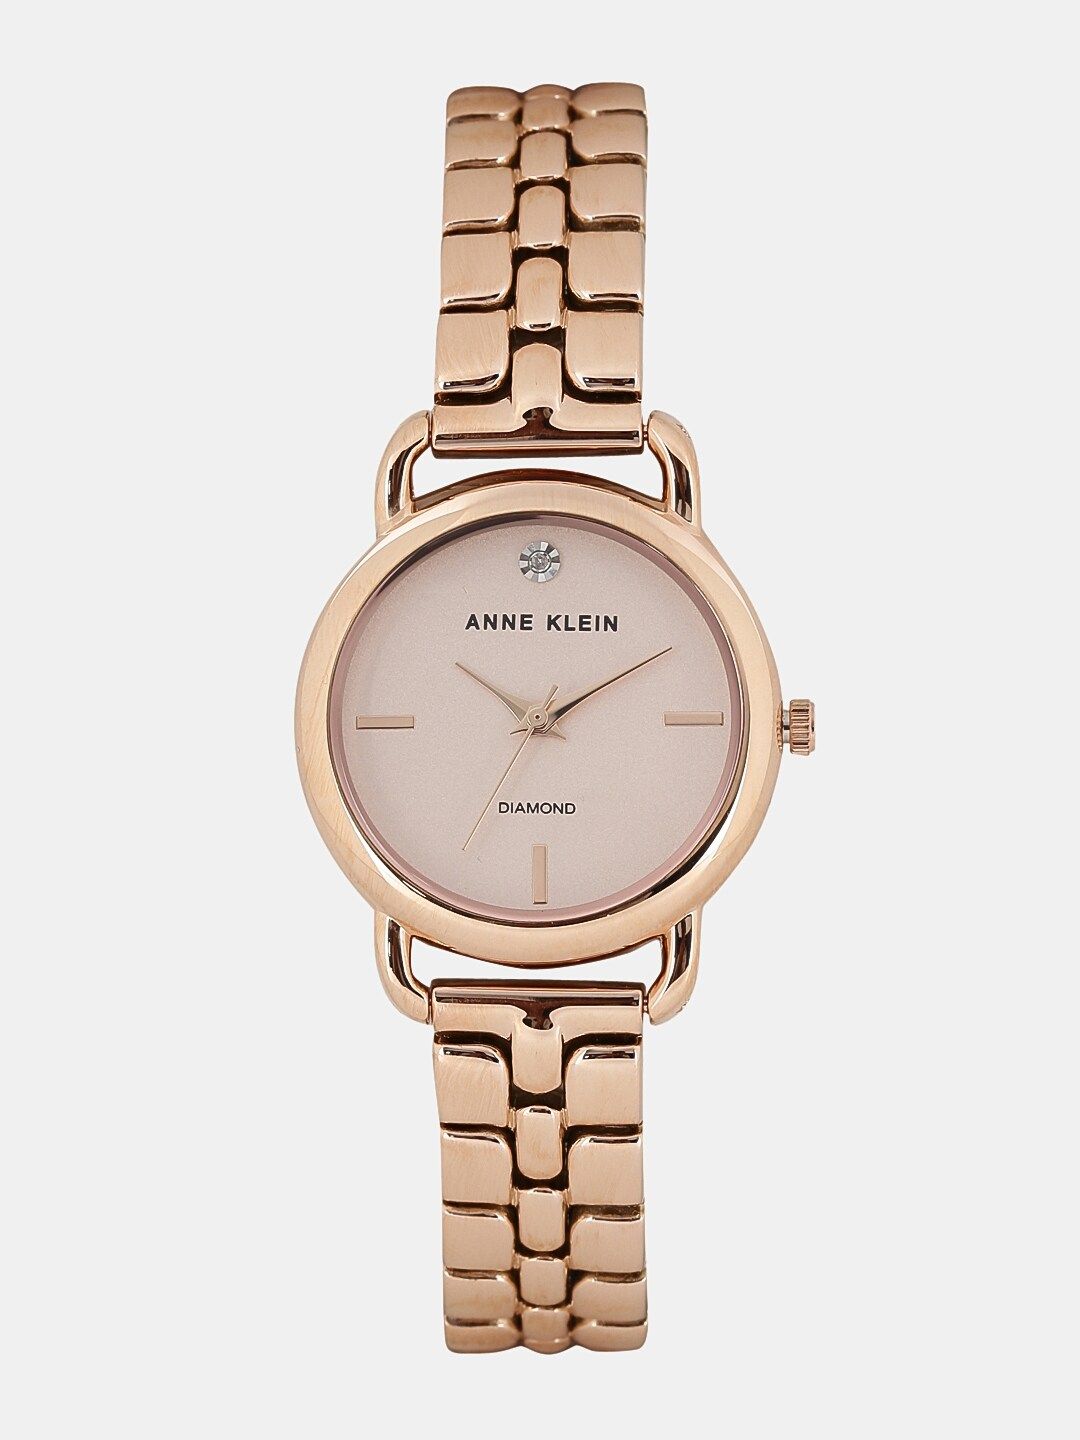 ANNE KLEIN Women Gold-Toned Analogue Watch Price in India